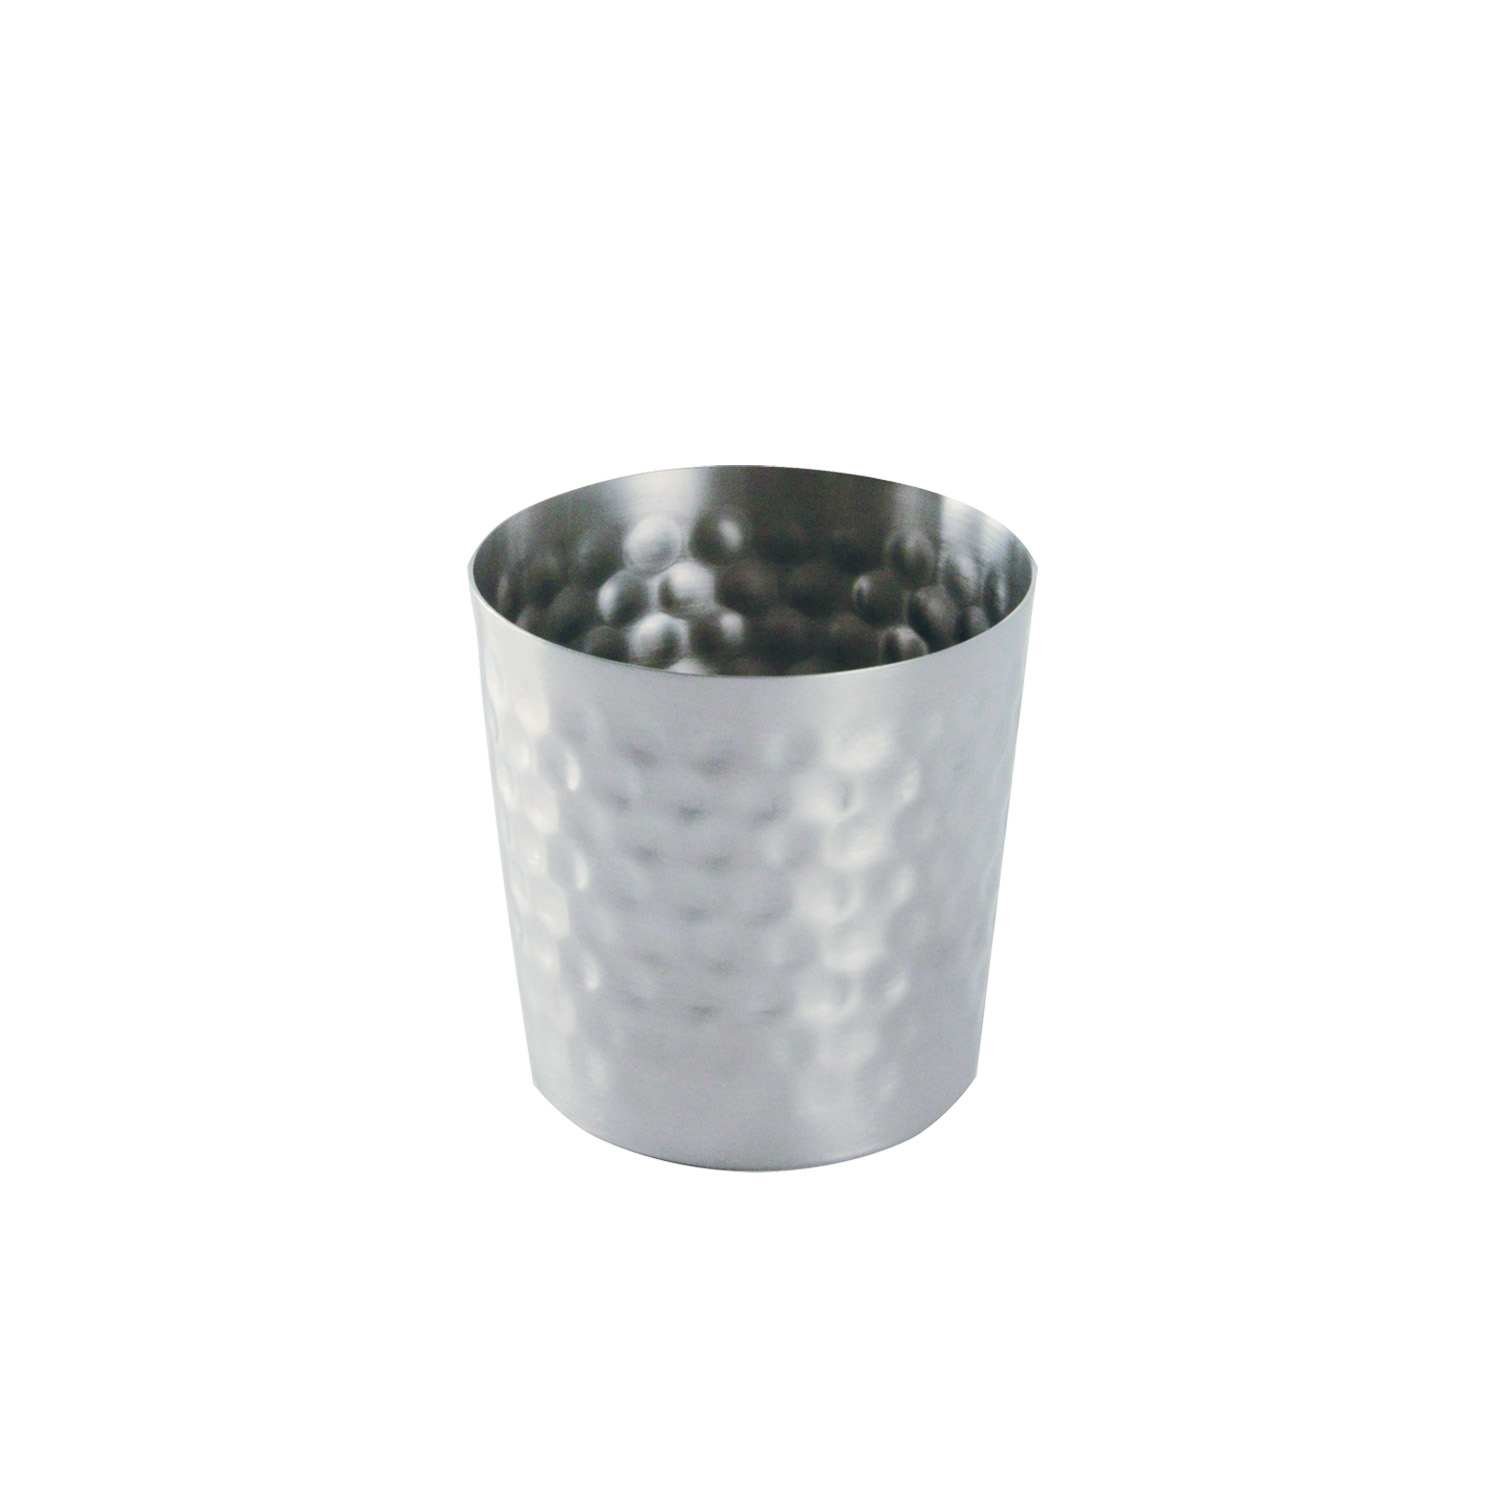 CAC China SMFC-3H Stainless Steel Hammered Mini Fry Cup 3 1/2"Dia x 3-1/2" H